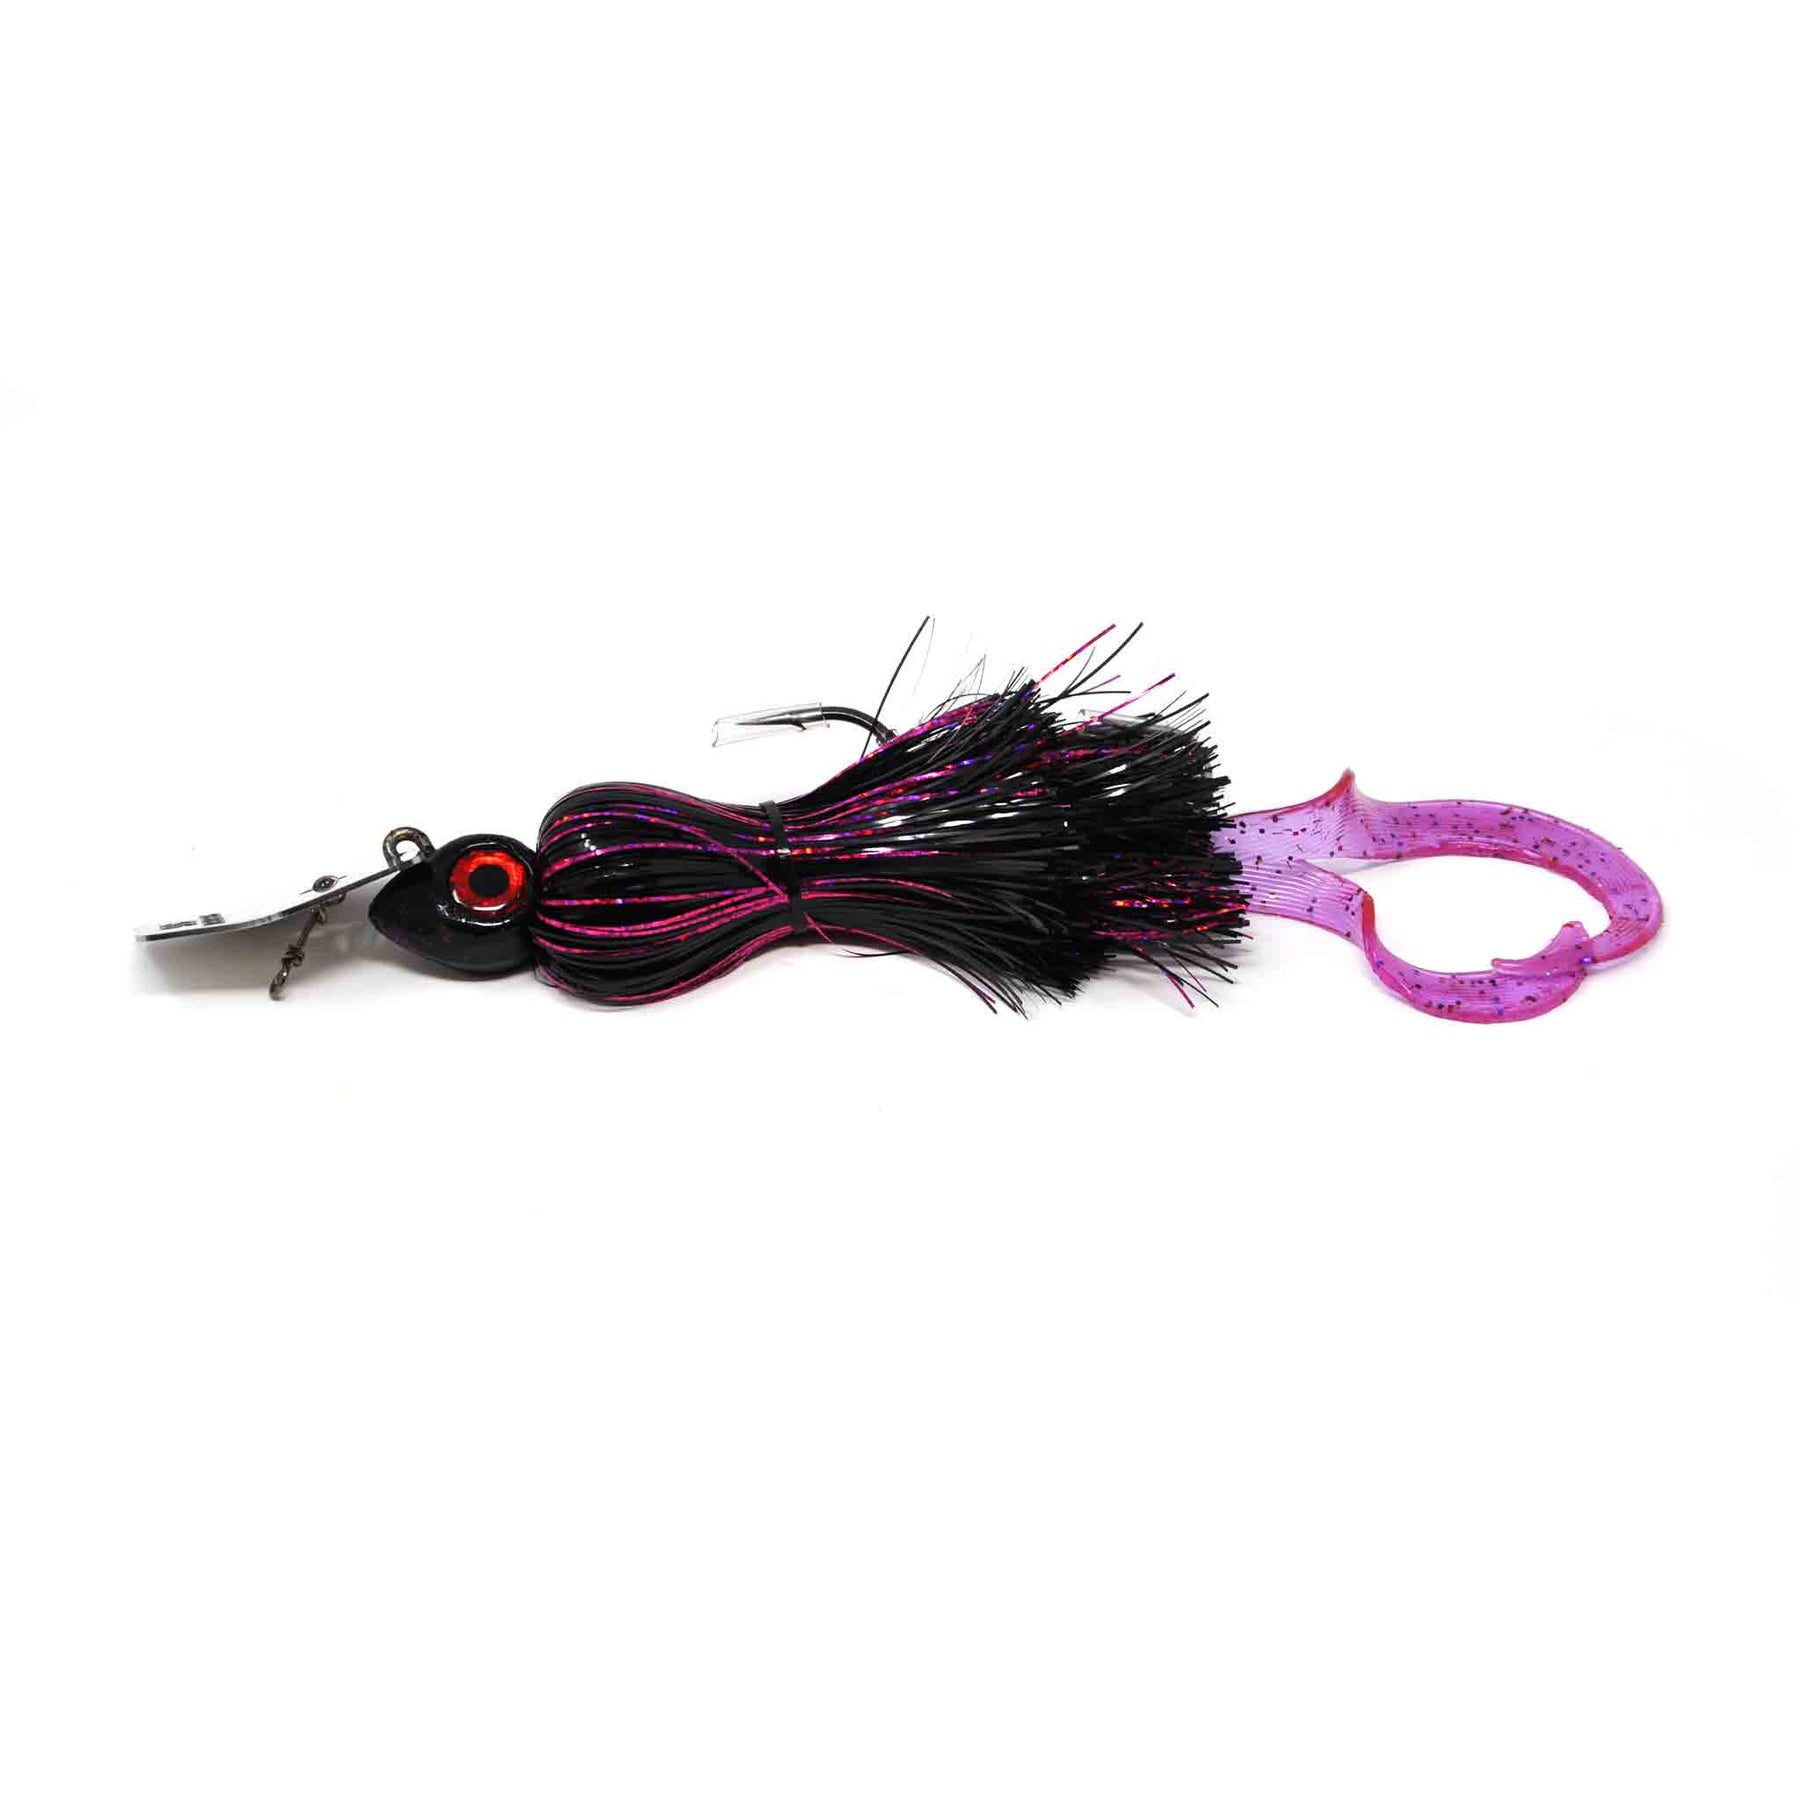 SS Leurres Sky-Candy Chatterbait 5oz Black / Pink Chatterbaits